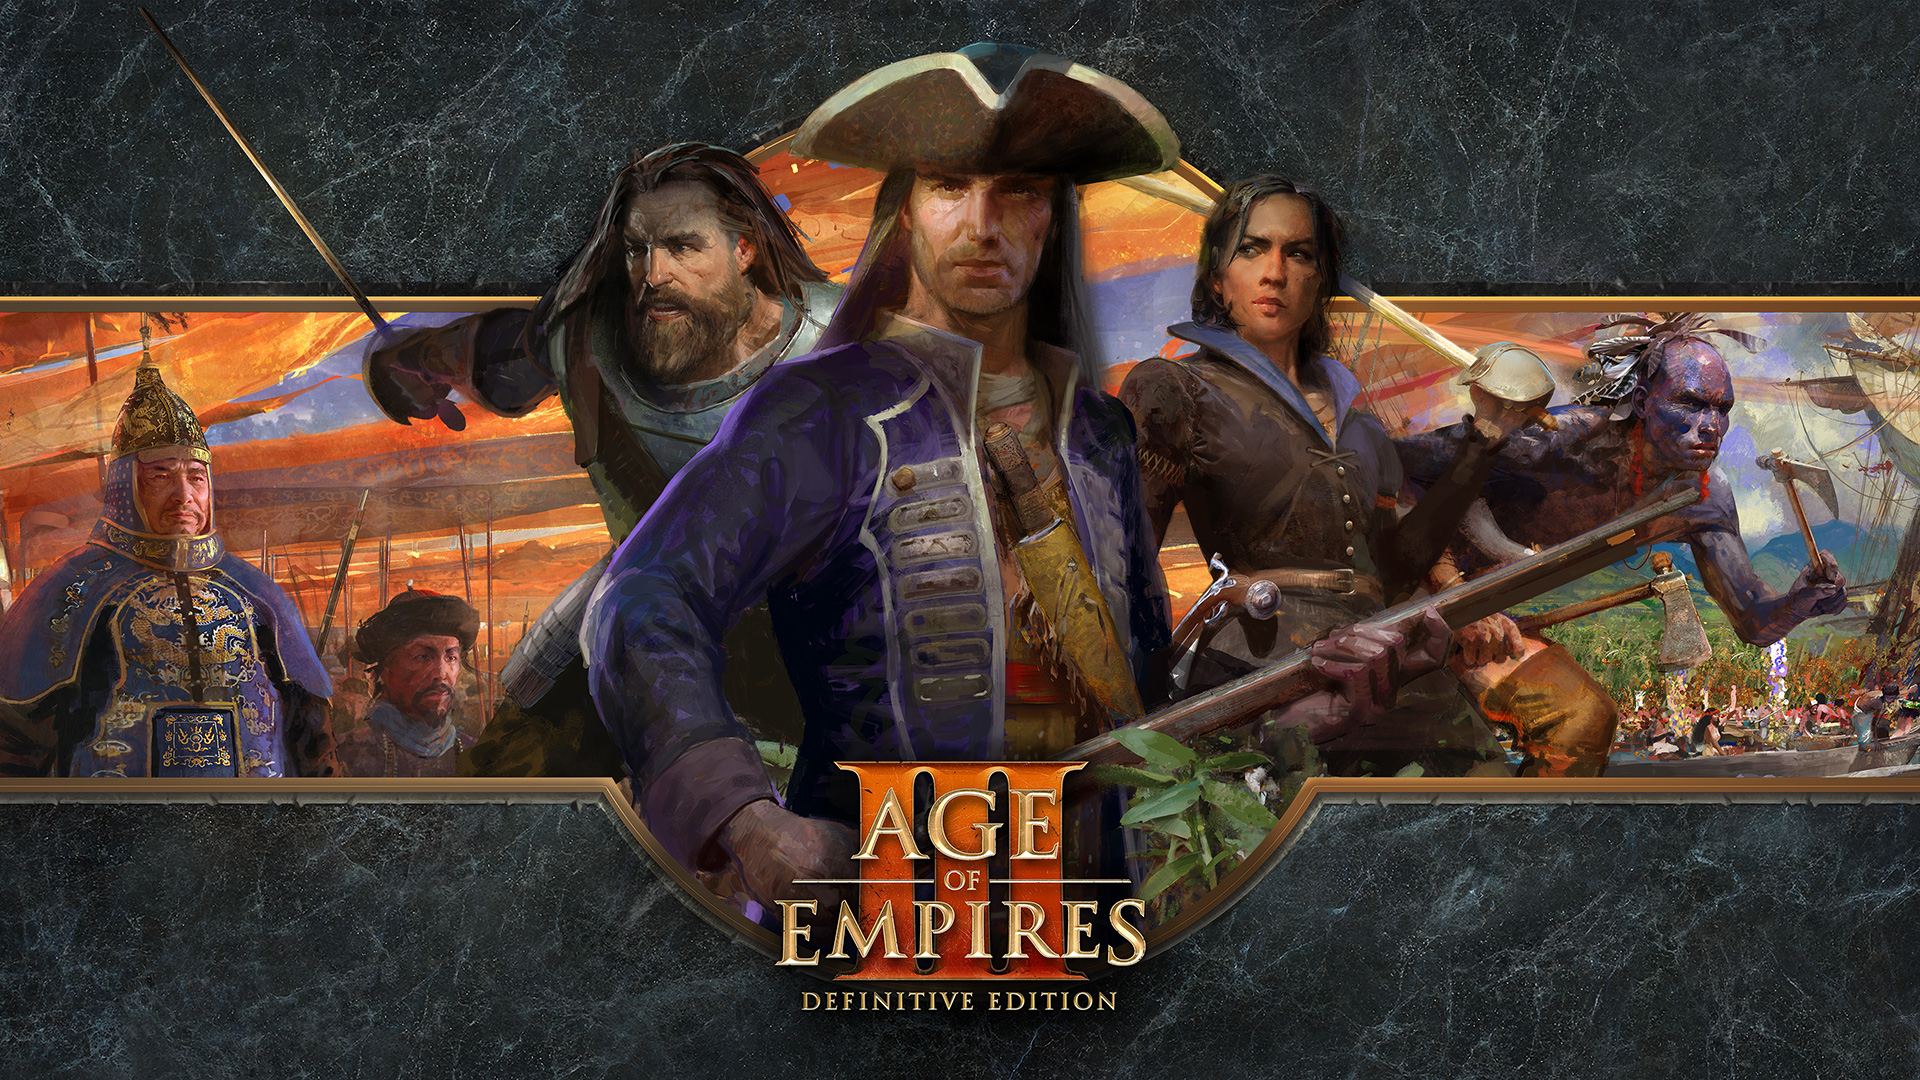 age of empires definitive edition free download